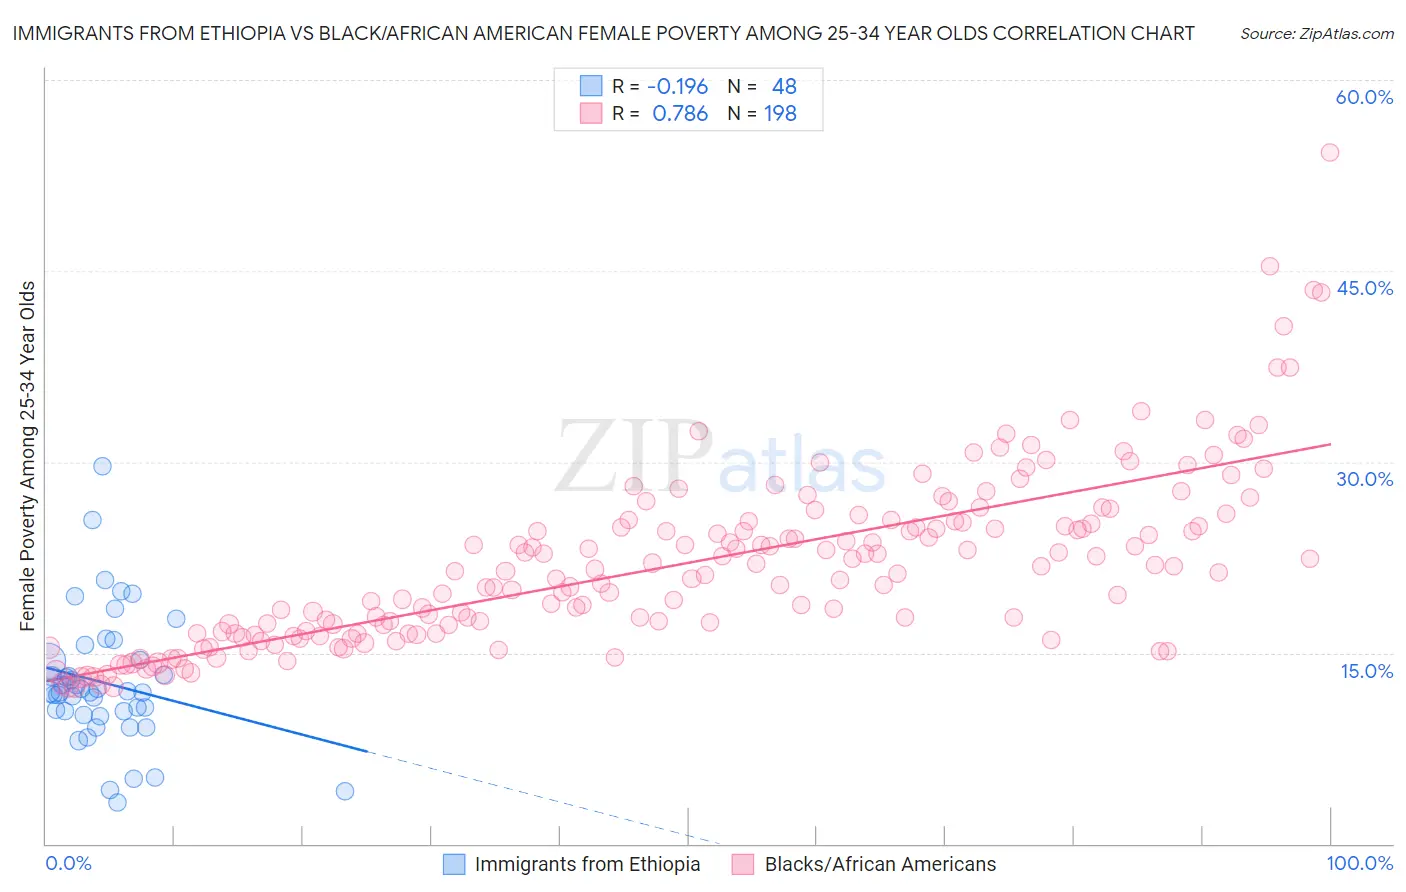 Immigrants from Ethiopia vs Black/African American Female Poverty Among 25-34 Year Olds